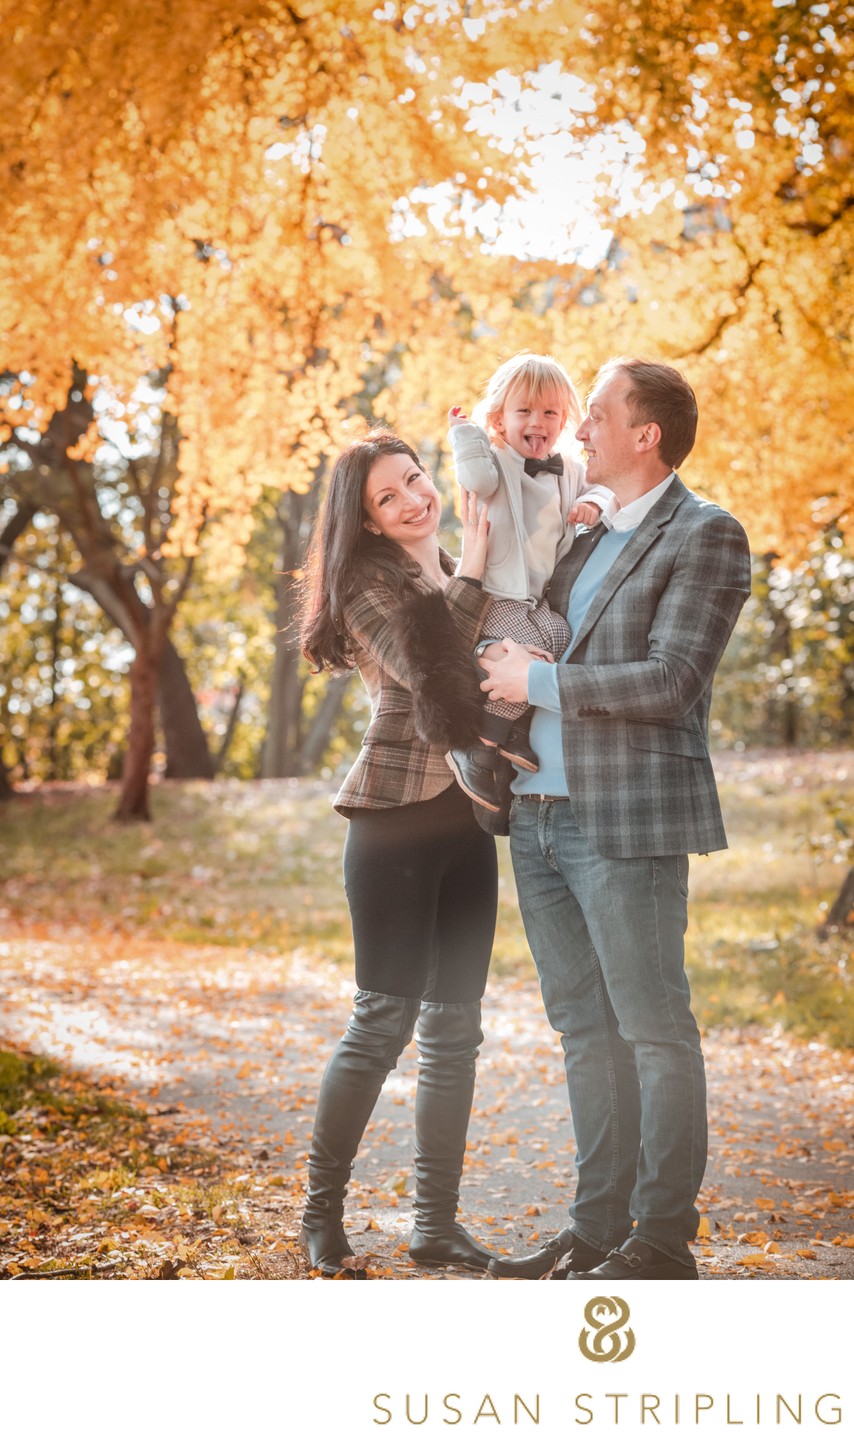 Best Family Photographer NYC